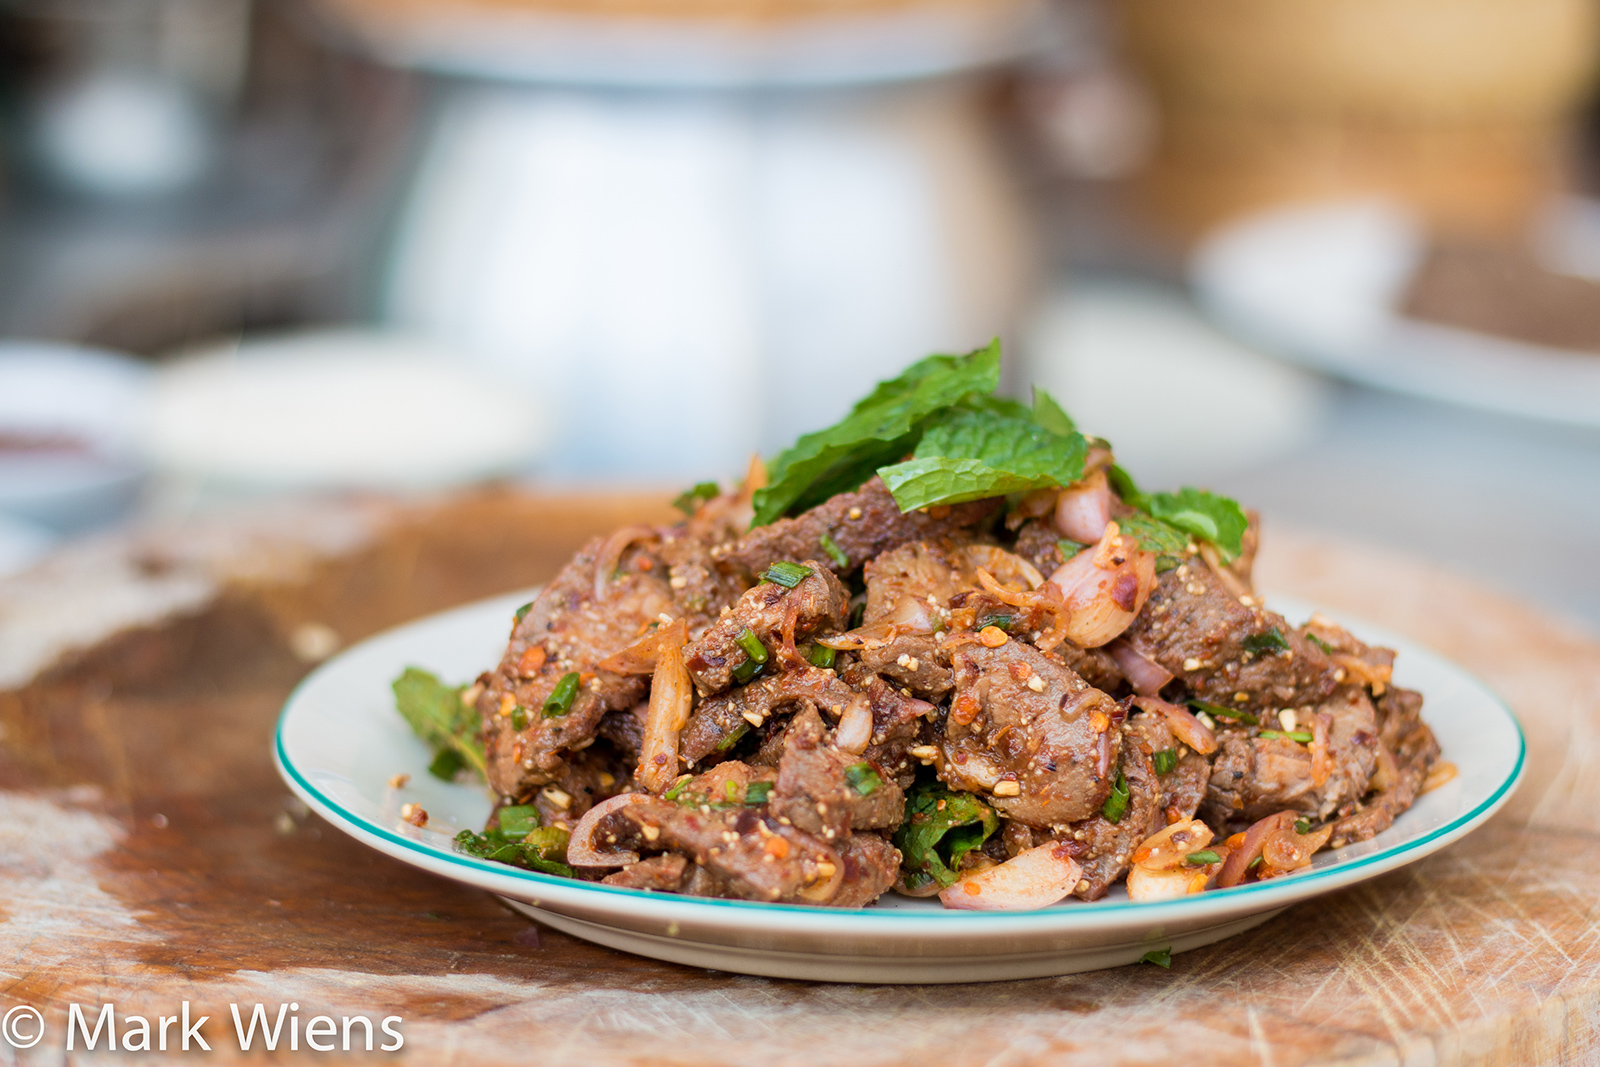 Nam Tok Recipe (น้ำตกเนื้อ): How To Make Delicious Thai Waterfall Beef Salad